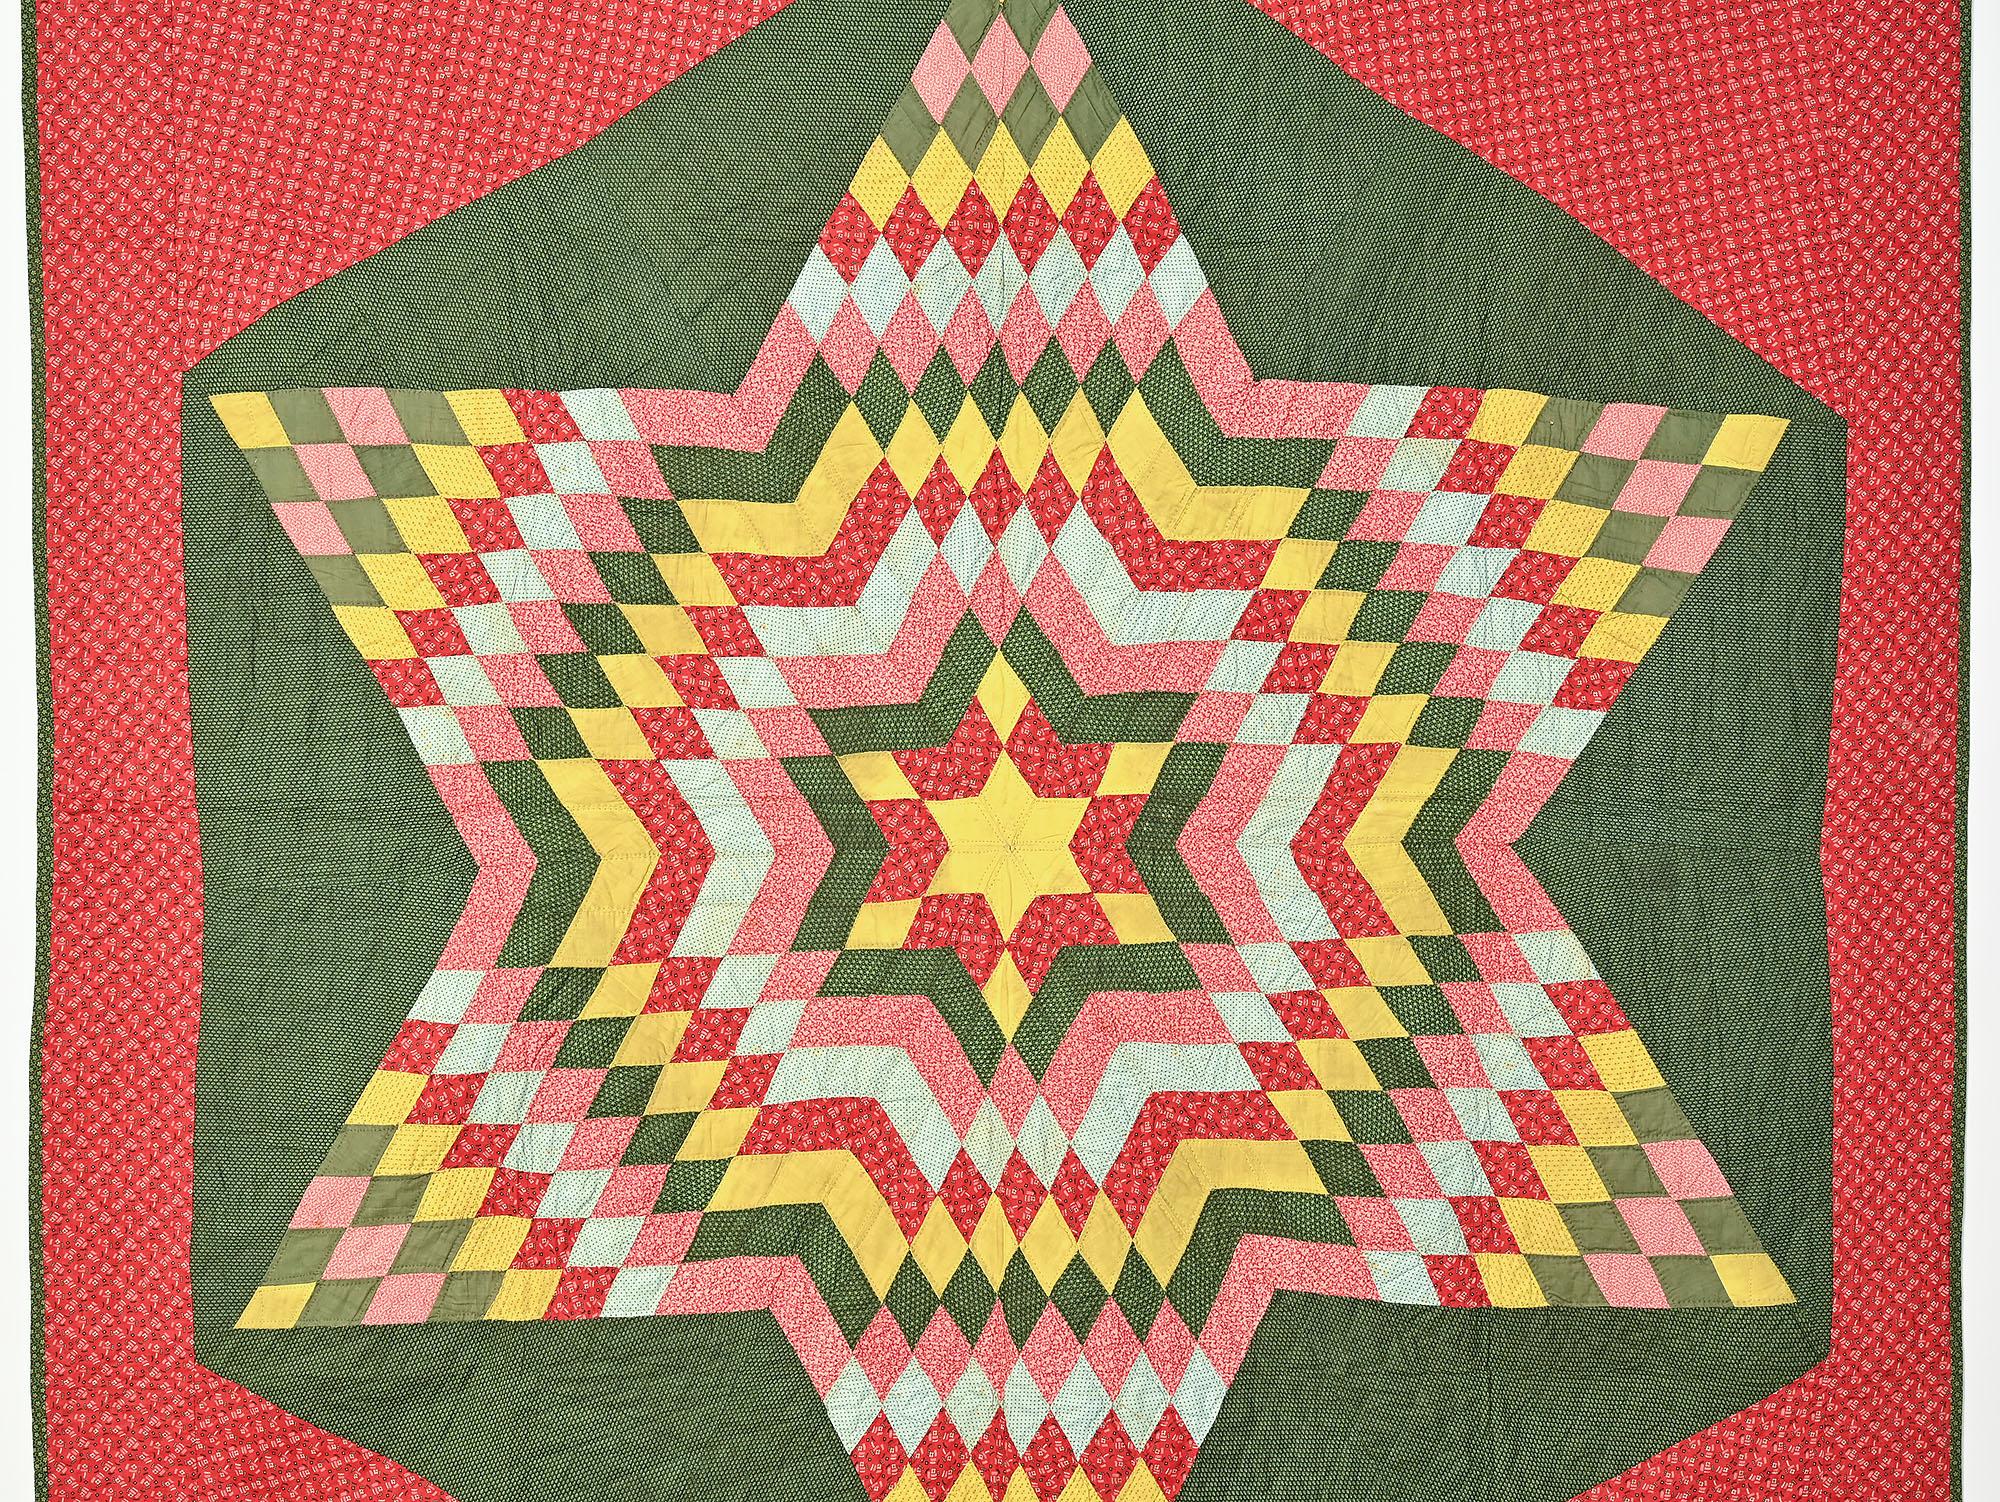 This bold Six Point Star quilt is set in a frame that highlights the diamond shaped pieces of the Star. The central Star is made of a combination of solid and printed fabrics from the 1880's. The quilt is in excellent, unwashed condition. There is